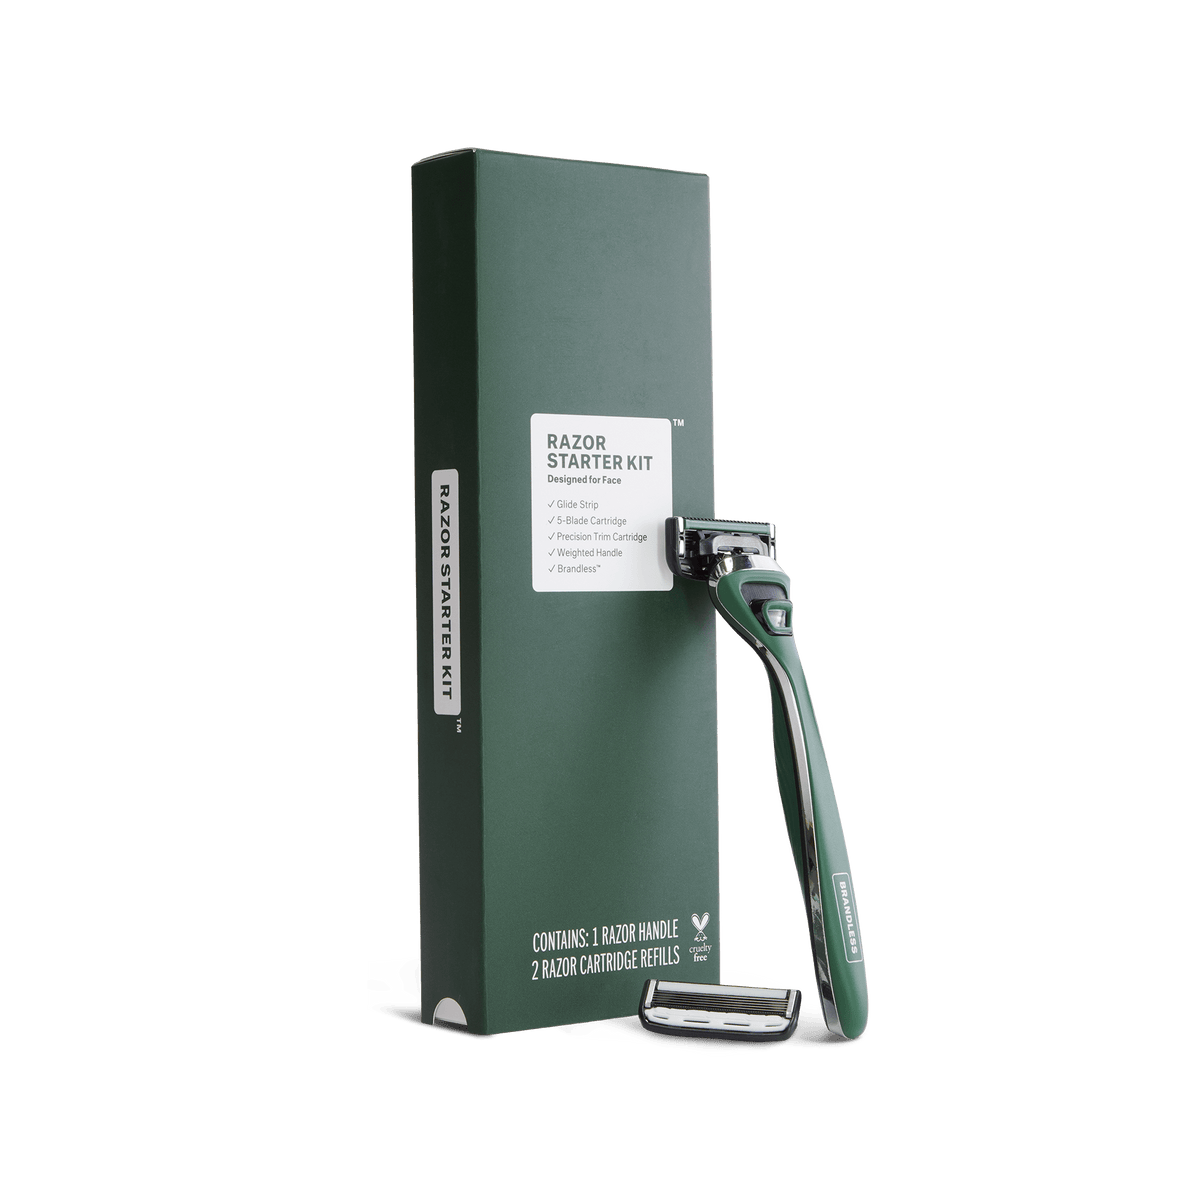 Product photo, brandless razor starter kit for face. Razor leaning up against the starter kit box in a forrest green and silver color, spare cartridge sits next to the handle.